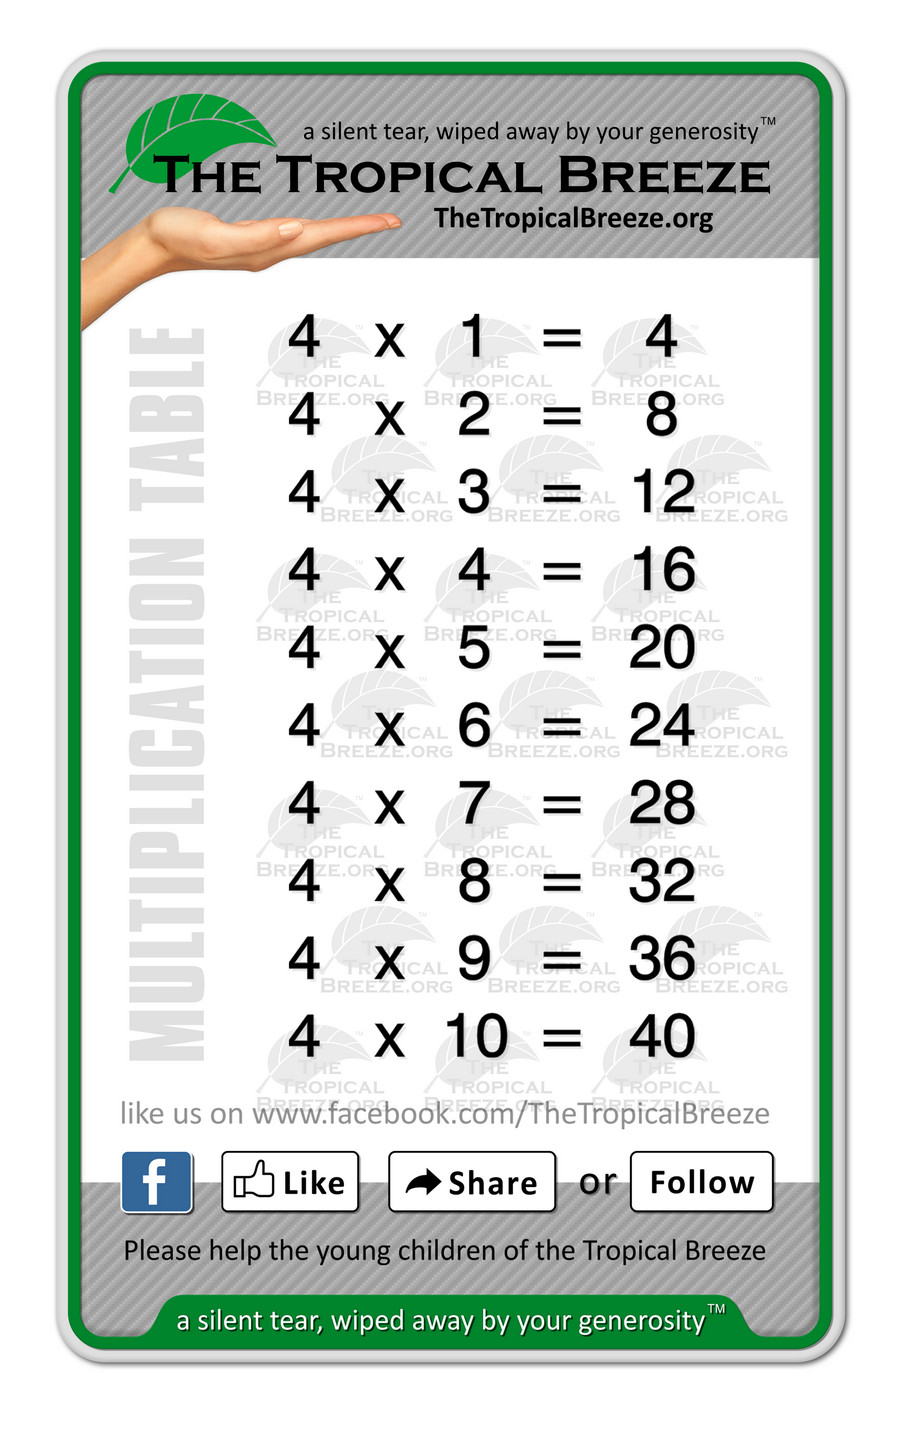 Download_free_math_multiplication_tables_from_www.TheTropicalBreeze.org - 4x